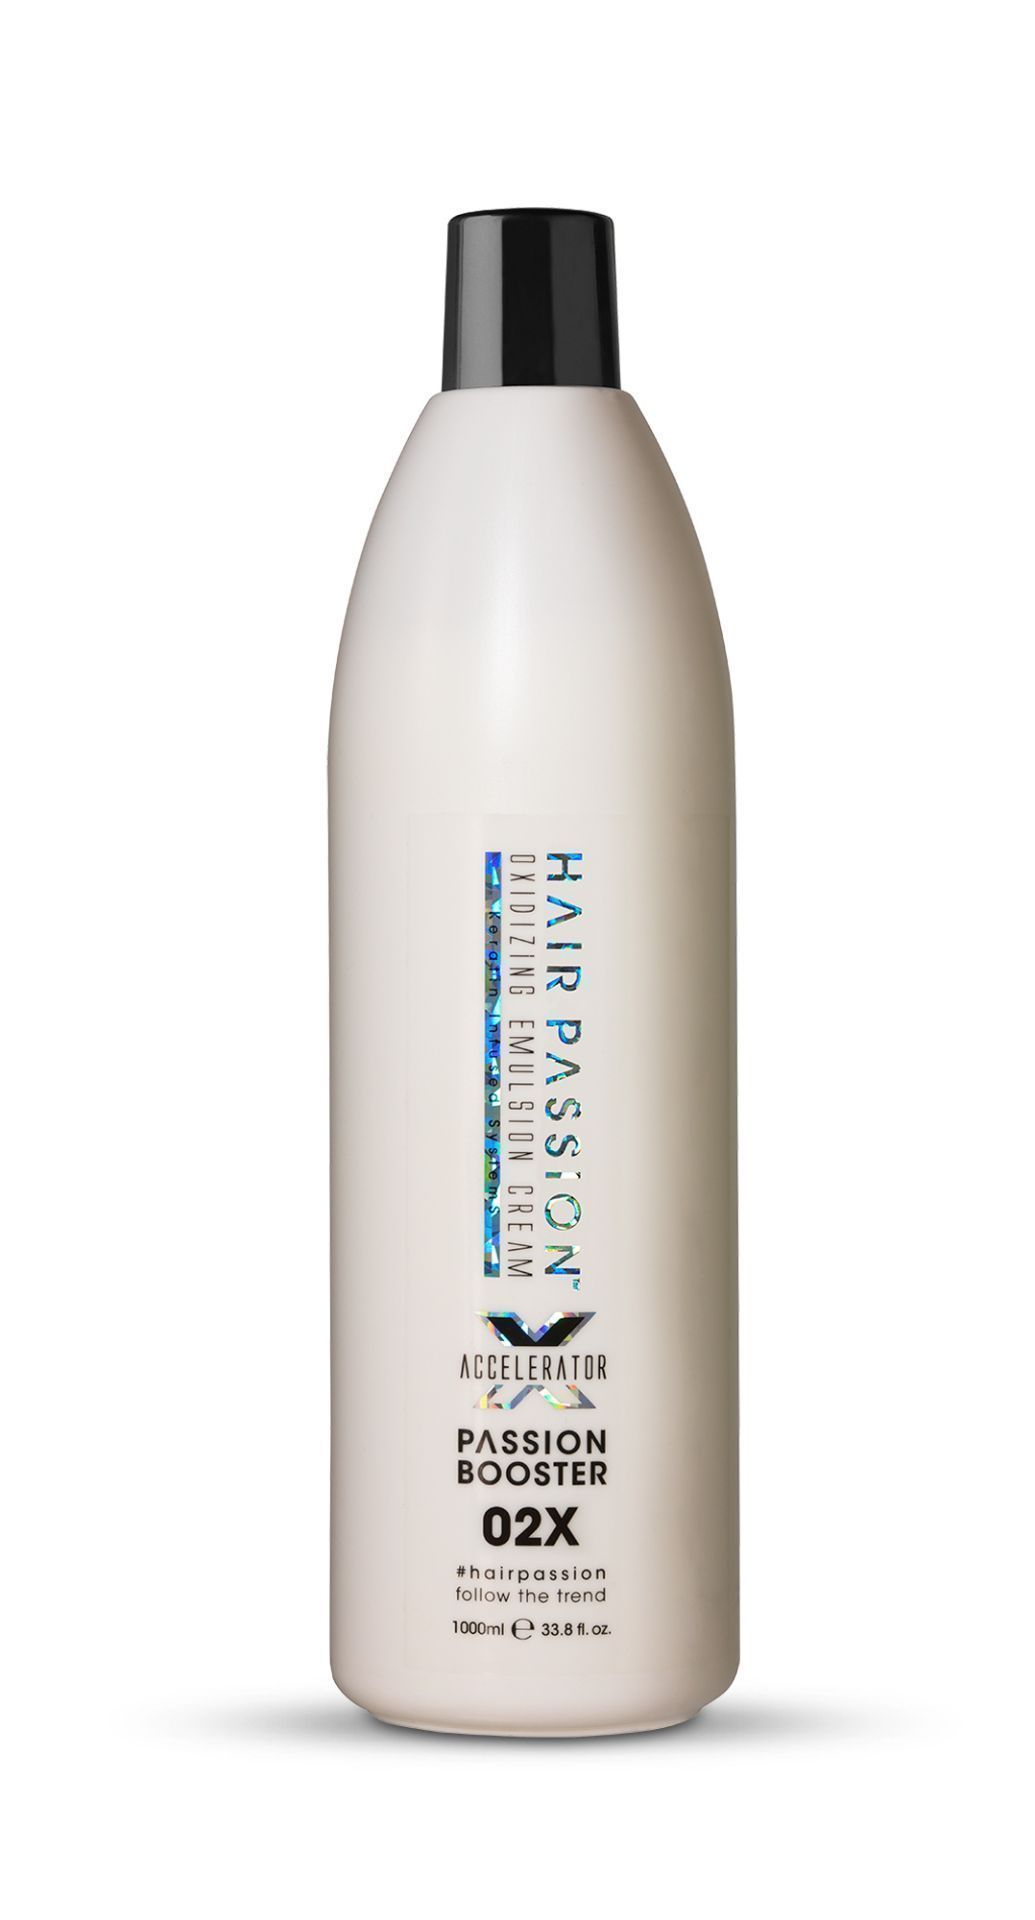 PALLET TO INCLUDE 240 X BRAND NEW HAIR PASSION 1L PASSION BOOSTER S1P